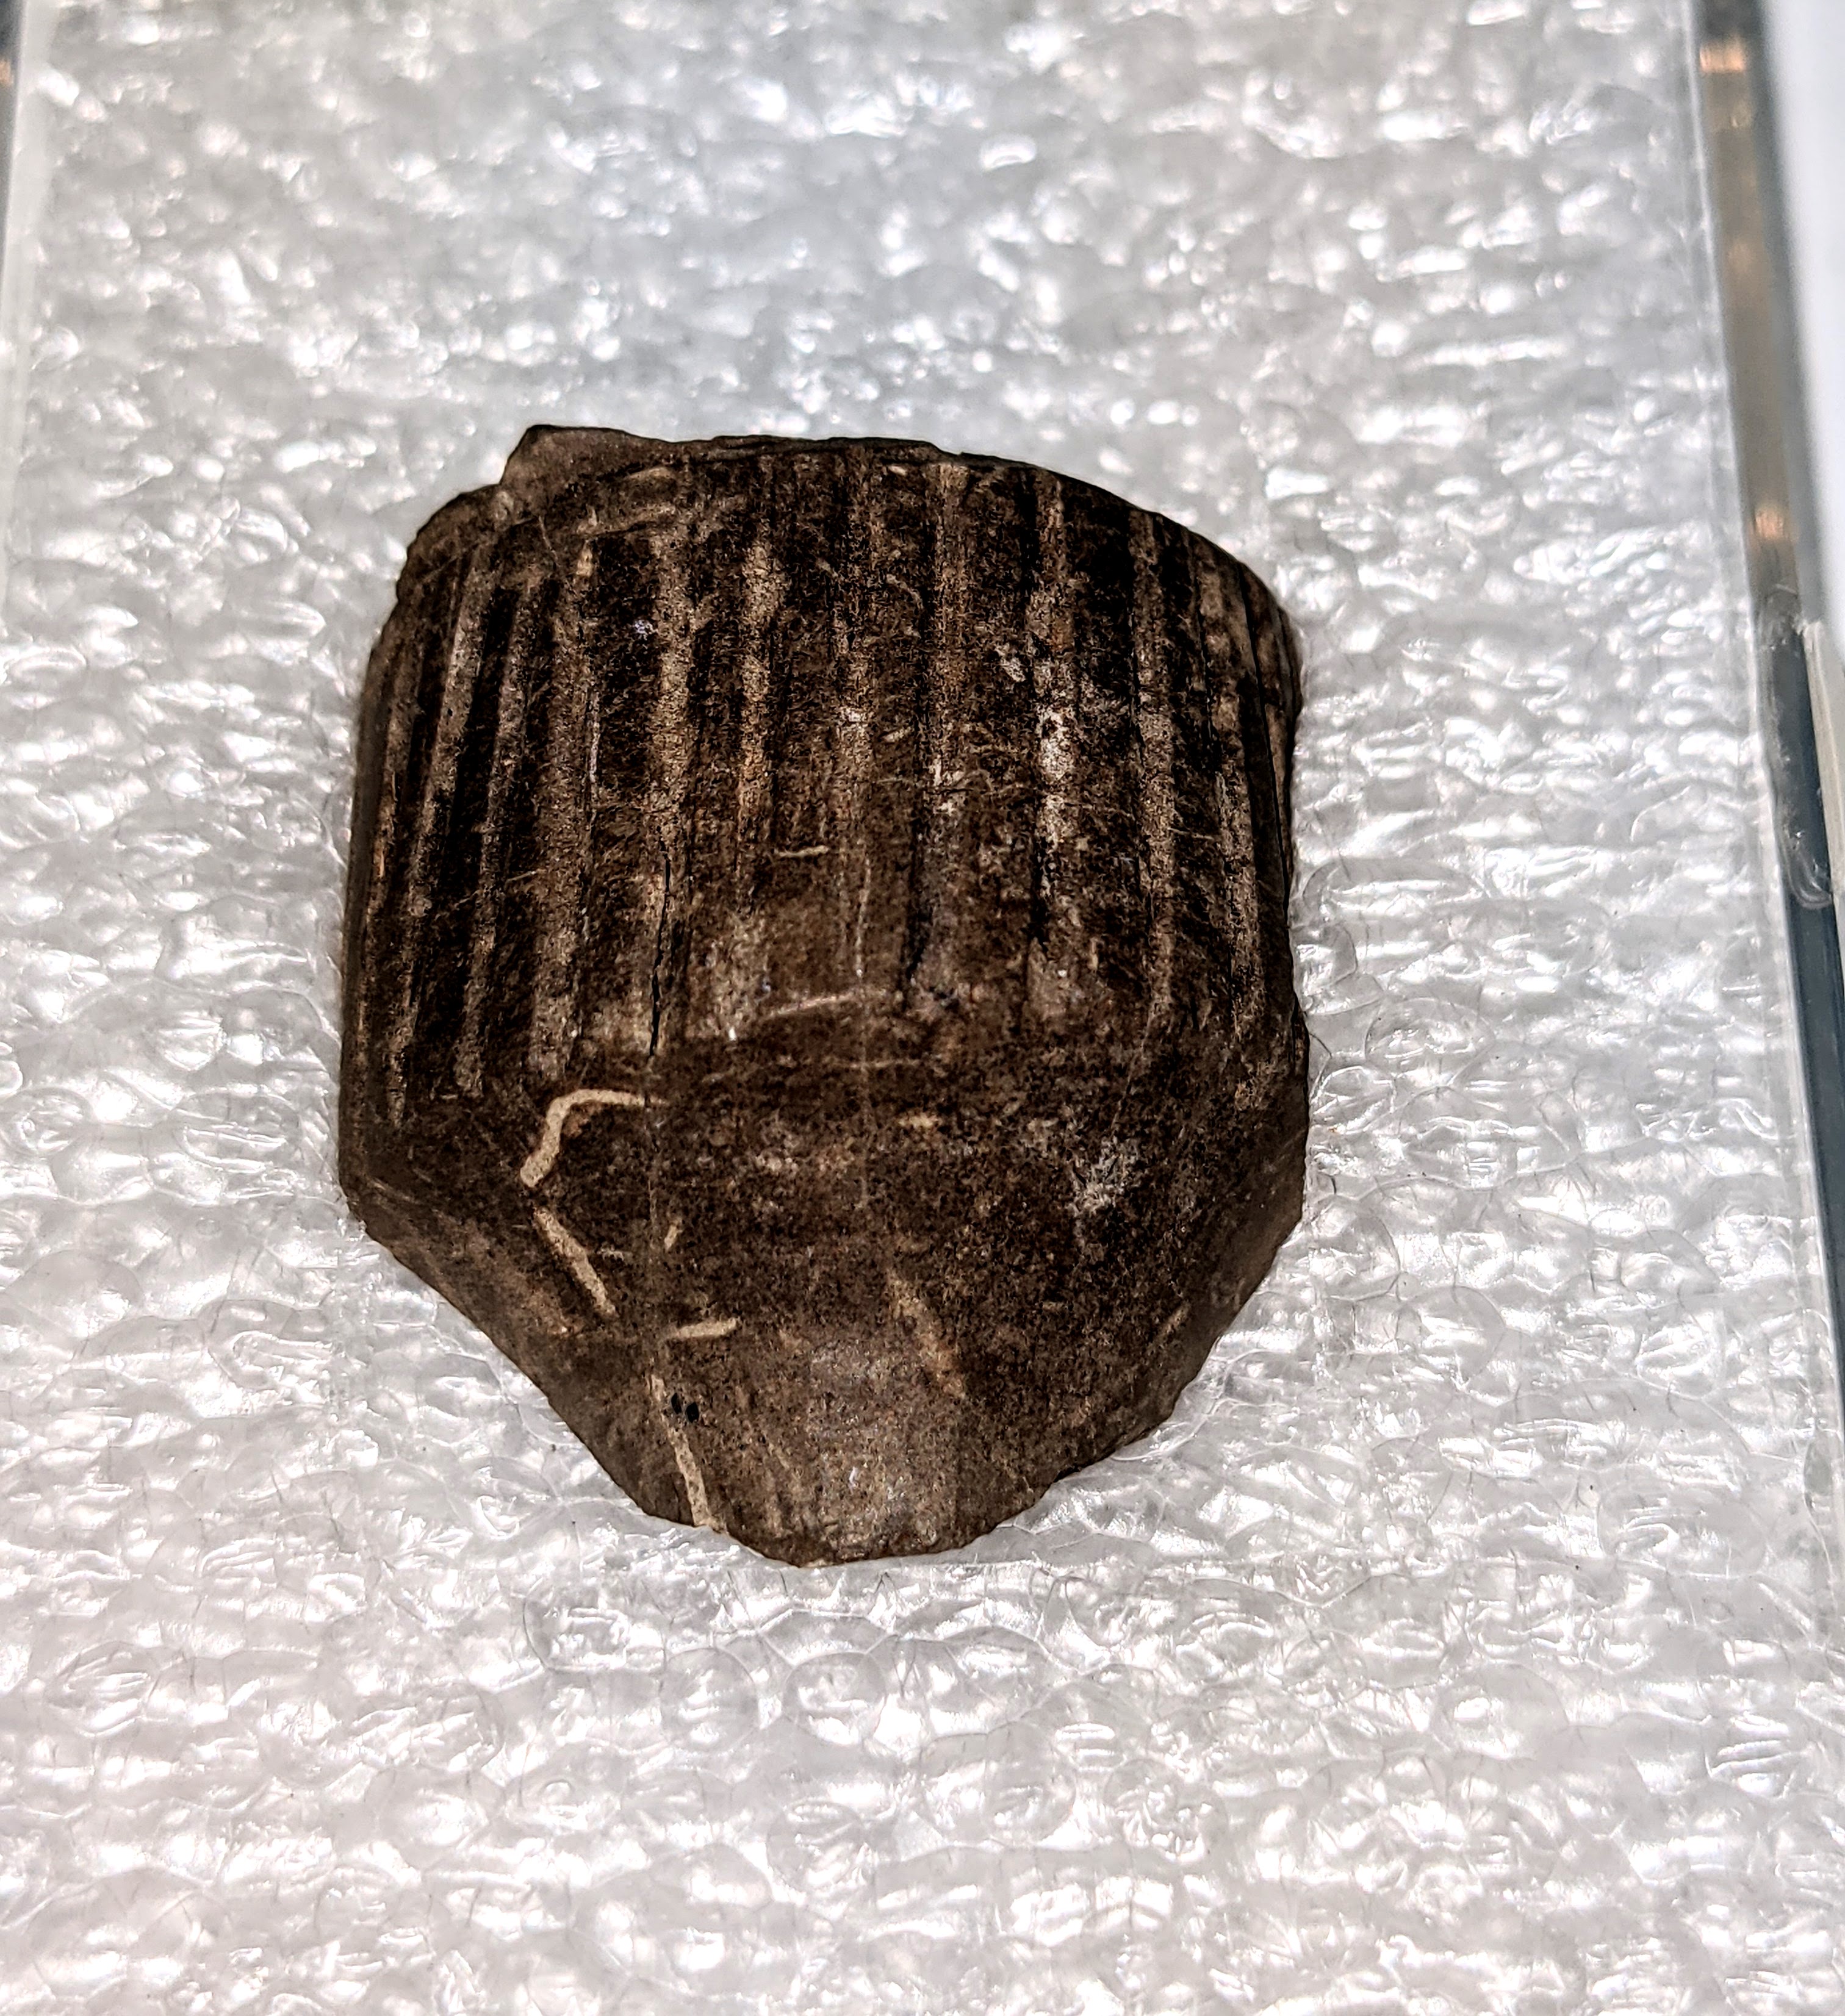 This small artifact is a piece of a stone pipe bowl. Though not officially an artifact of the FVHC (it is on loan to us) it was discovered during an archeological dig in the area. This style of pipe is more commonly found in eastern Canada and its discovery here indicates it was likely a traded item in the early years of the fur trade.

31/05/2021